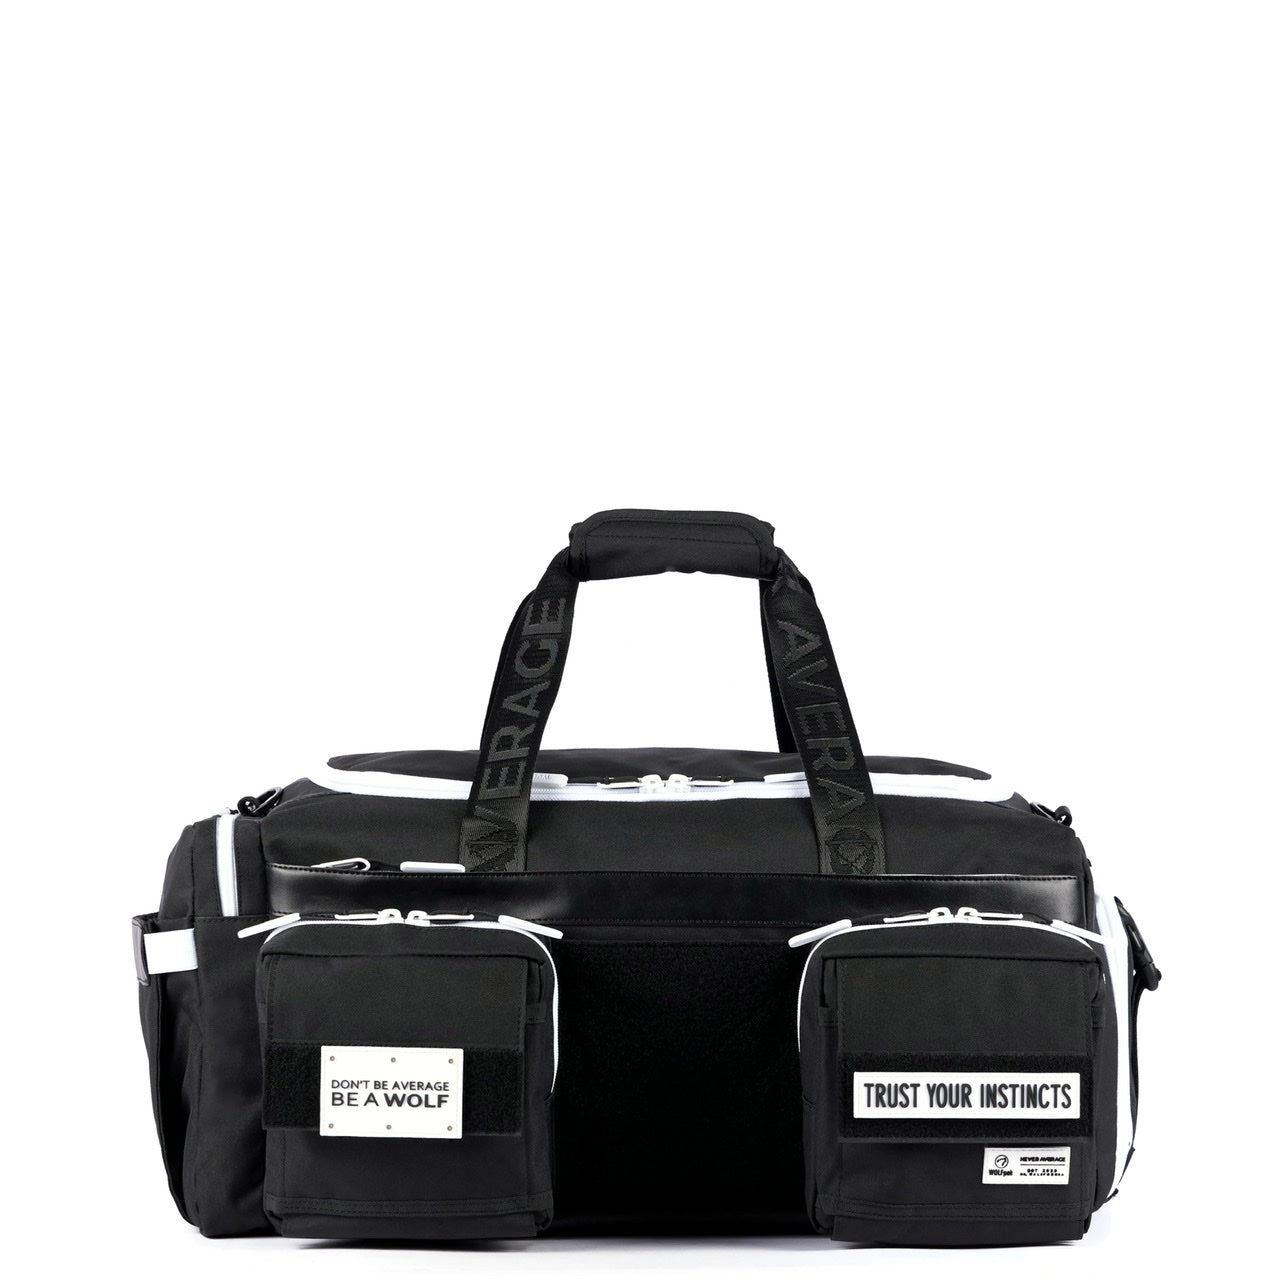 40L Ultimate Duffle Bag Alpha Black with White Accents